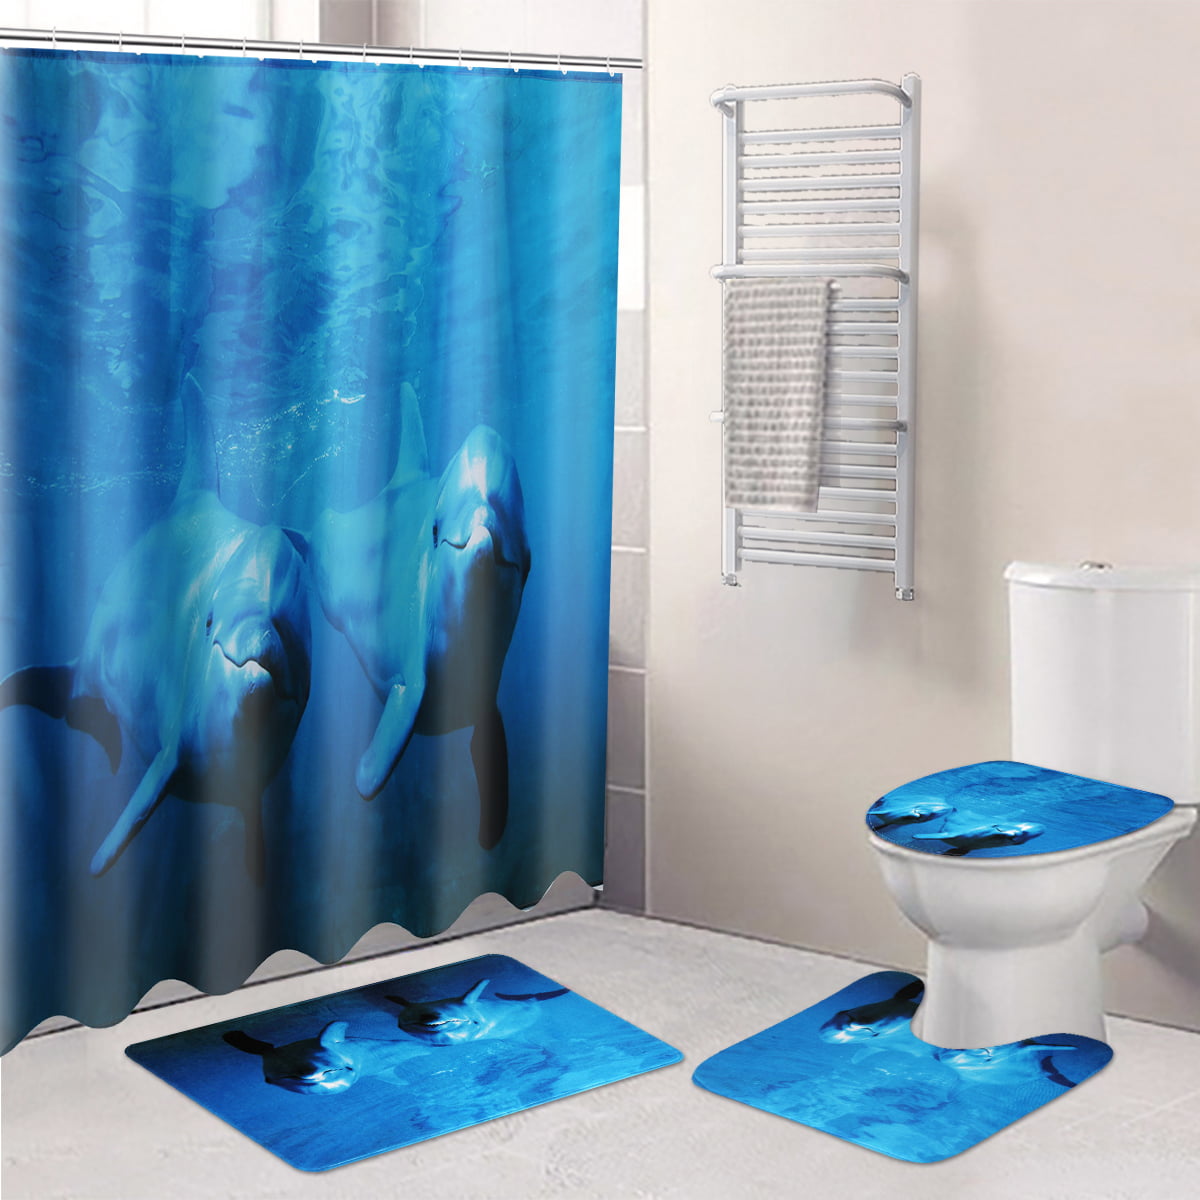 Deep Sea Dolphins Waterproof Bath Polyester Shower Curtain Liner Water Resistant 